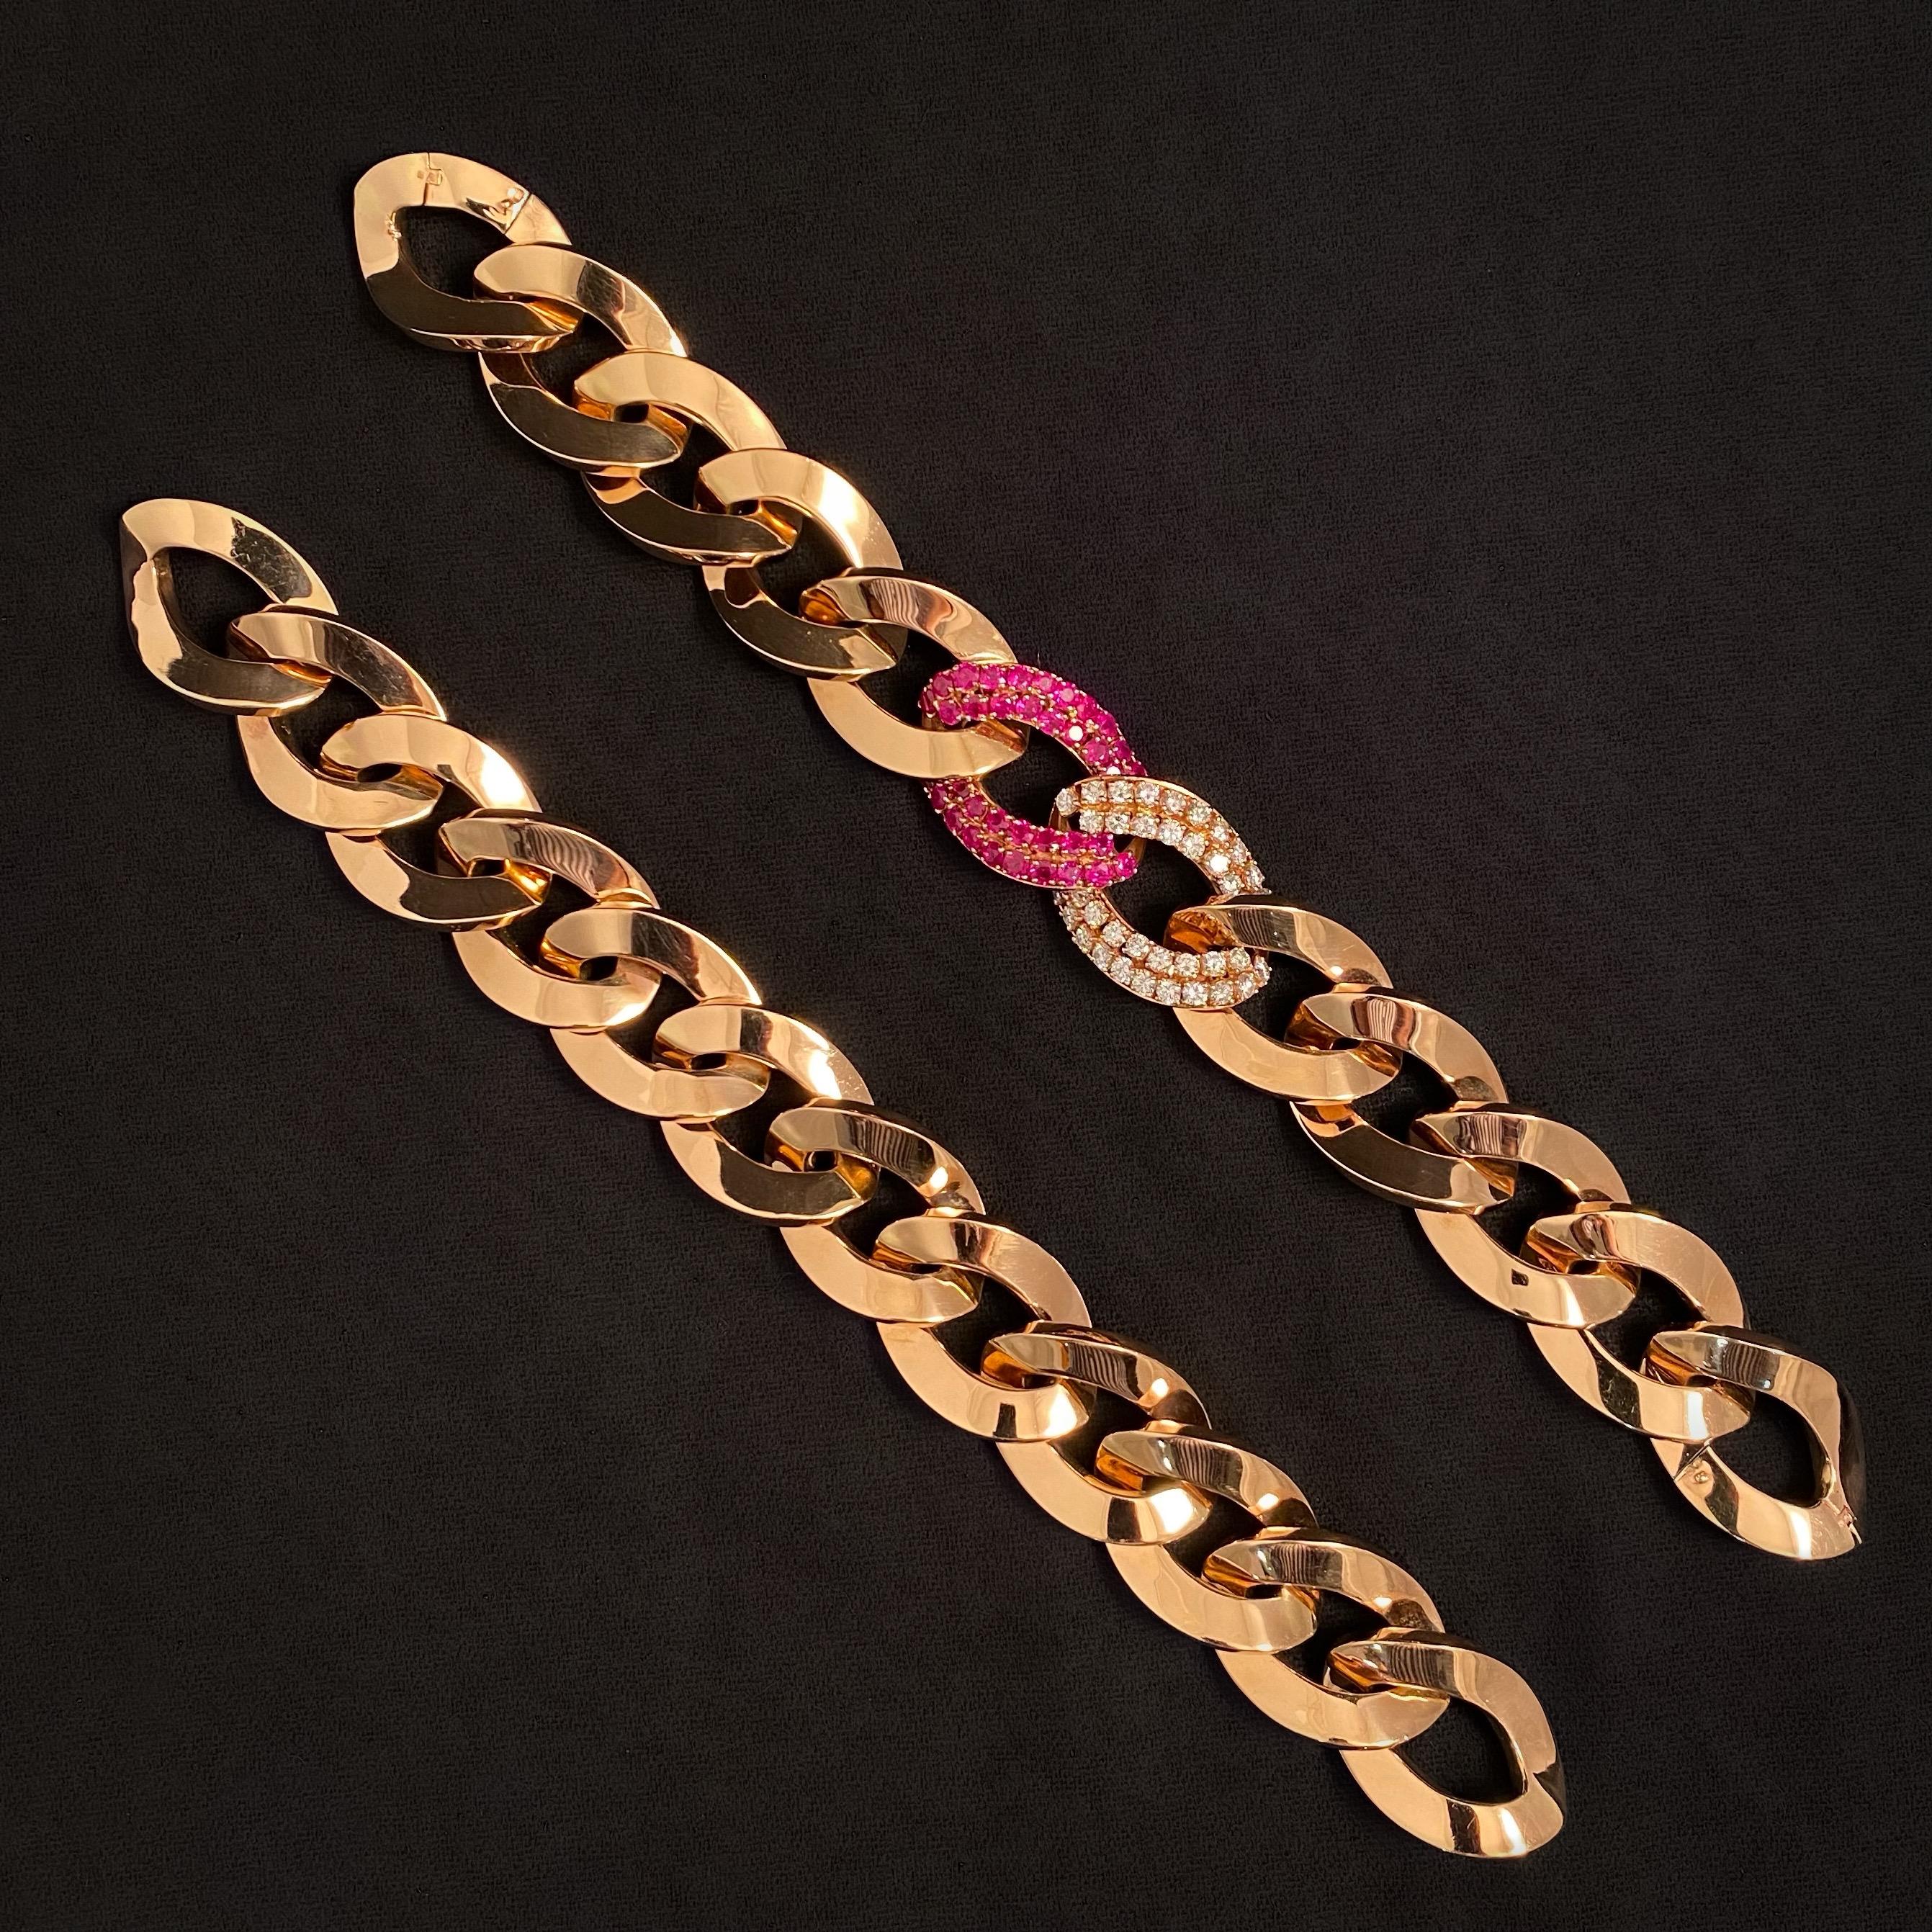 Fani Gioielli Vintage Ruby and Diamond Pair of Bracelets Convertible into a Necklace in 18 Kara Rose Gold, with Provenance, Italy, c. 2000. The necklace is designed as a wide curb link chain, one link set with 39 round-cut rubies connected to